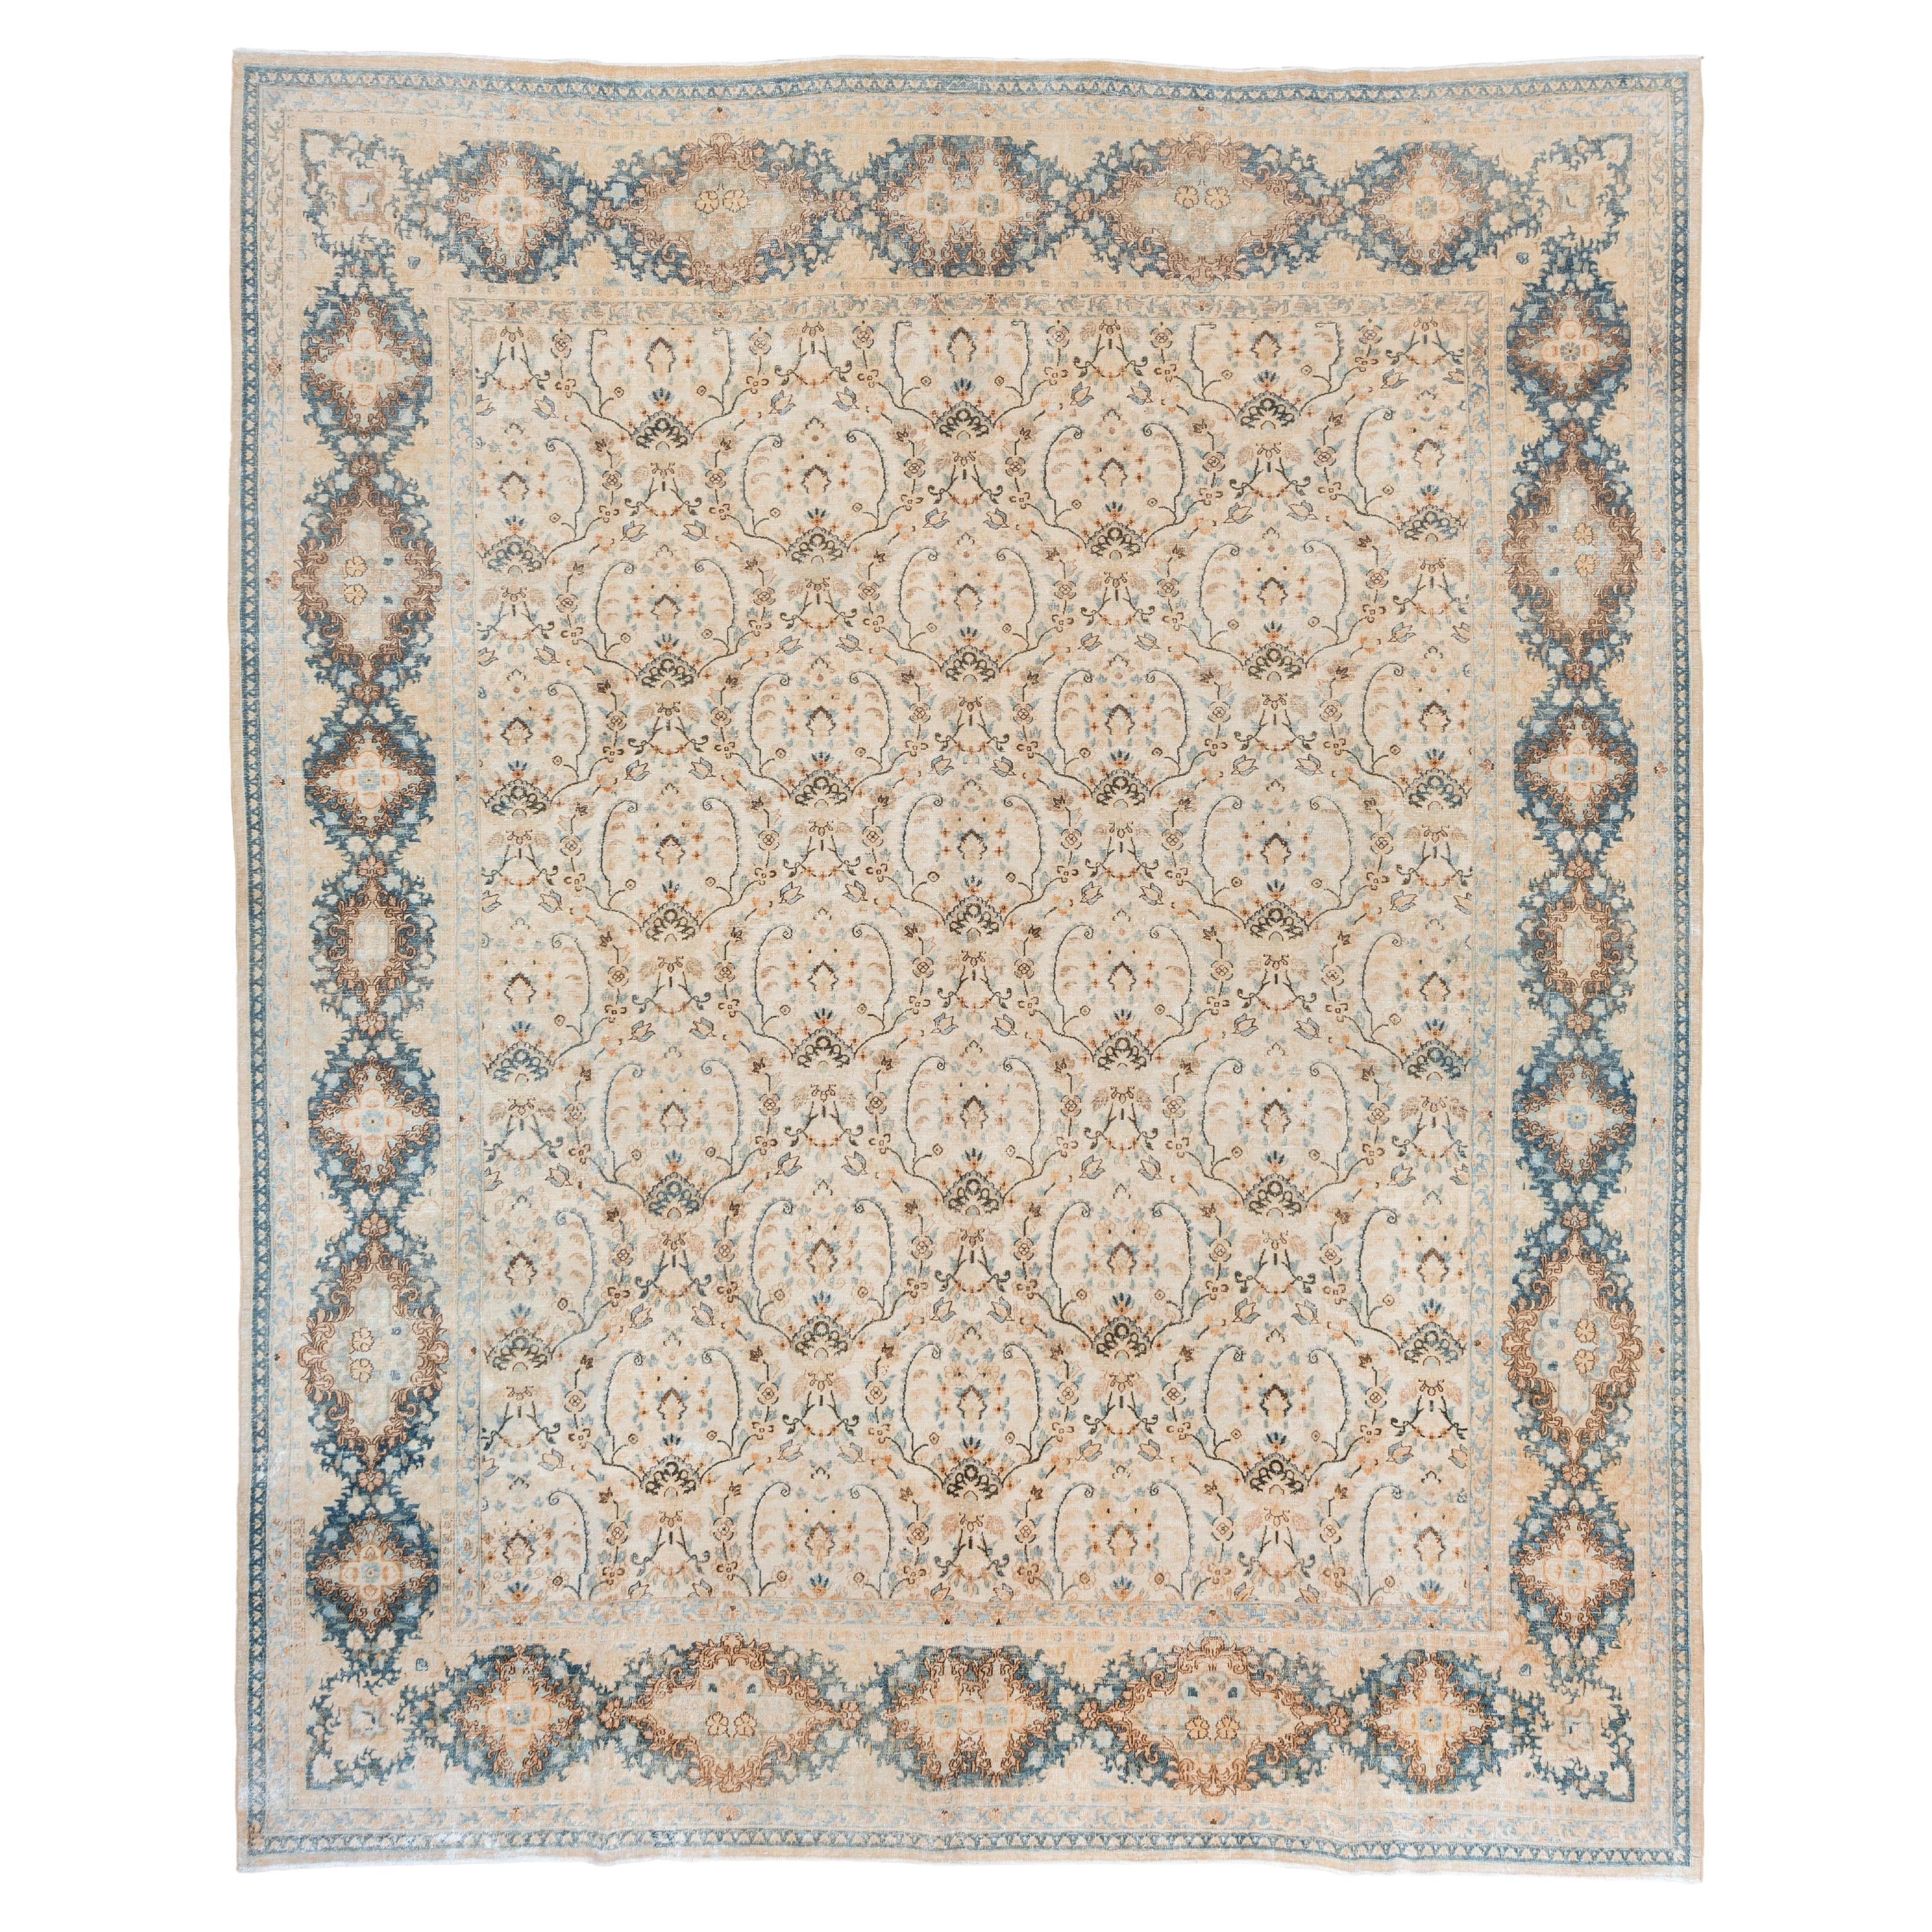 Eliko Rugs by David Ariel Antique Kerman Rug, Allover Field, Teal Accents For Sale